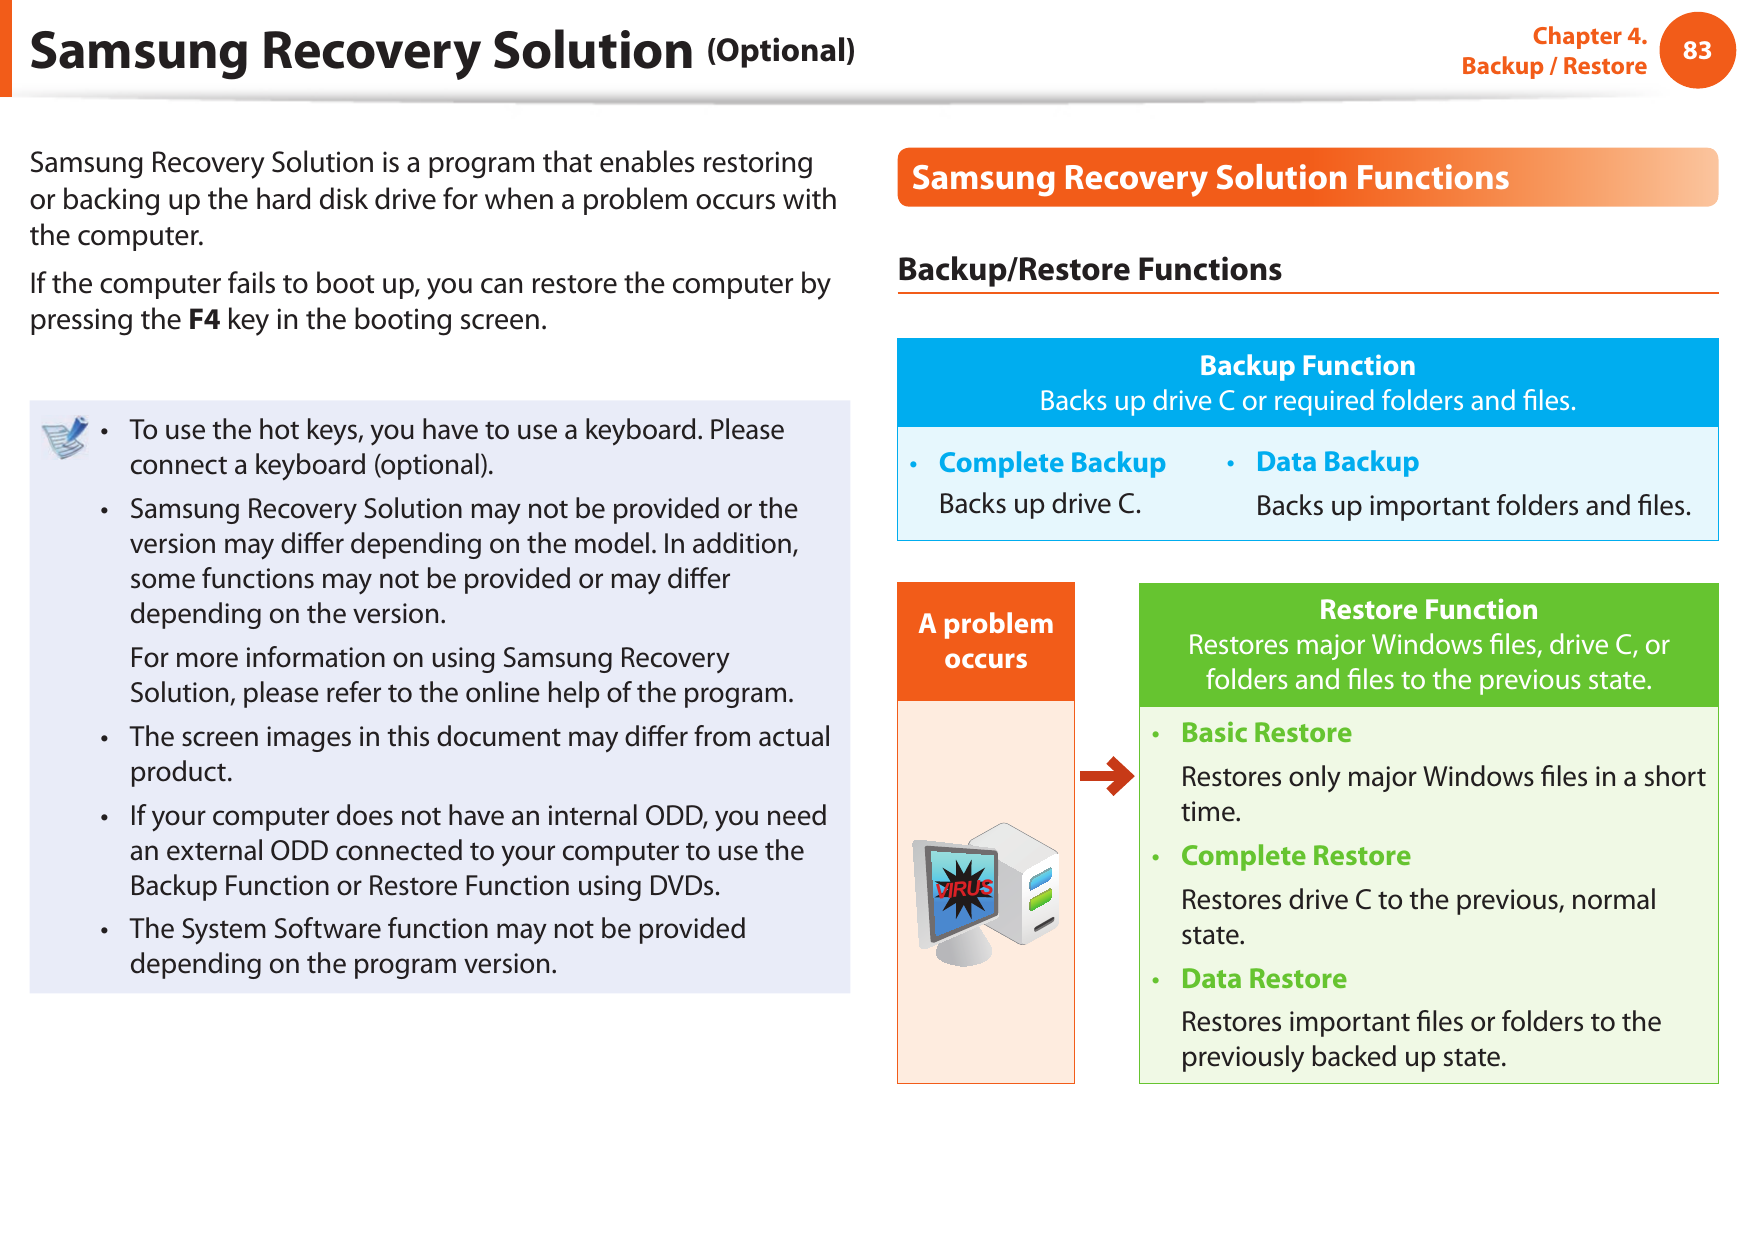 83Chapter 4.  Backup / RestoreSamsung Recovery Solution (Optional)Samsung Recovery Solution is a program that enables restoring or backing up the hard disk drive for when a problem occurs with the computer.If the computer fails to boot up, you can restore the computer by pressing the F4 key in the booting screen.To use the hot keys, you have to use a keyboard. Please • connect a keyboard (optional).Samsung Recovery Solution may not be provided or the • version may di er depending on the model. In addition, some functions may not be provided or may di er depending on the version.  For more information on using Samsung Recovery Solution, please refer to the online help of the program.The screen images in this document may di er from actual • product.If your computer does not have an internal ODD, you need • an external ODD connected to your computer to use the Backup Function or Restore Function using DVDs.The System Software function may not be provided • depending on the program version.Samsung Recovery Solution FunctionsBackup/Restore FunctionsBackup FunctionBacks up drive C or required folders and  les.Complete Backup•   Backs up drive C.Data Backup•   Backs up important folders and  les.A problem occursV I R U SRestore FunctionRestores major Windows  les, drive C, or folders and  les to the previous state.Basic Restore•   Restores only major Windows  les in a short time.Complete Restore•   Restores drive C to the previous, normal state.Data Restore•   Restores important  les or folders to the previously backed up state.